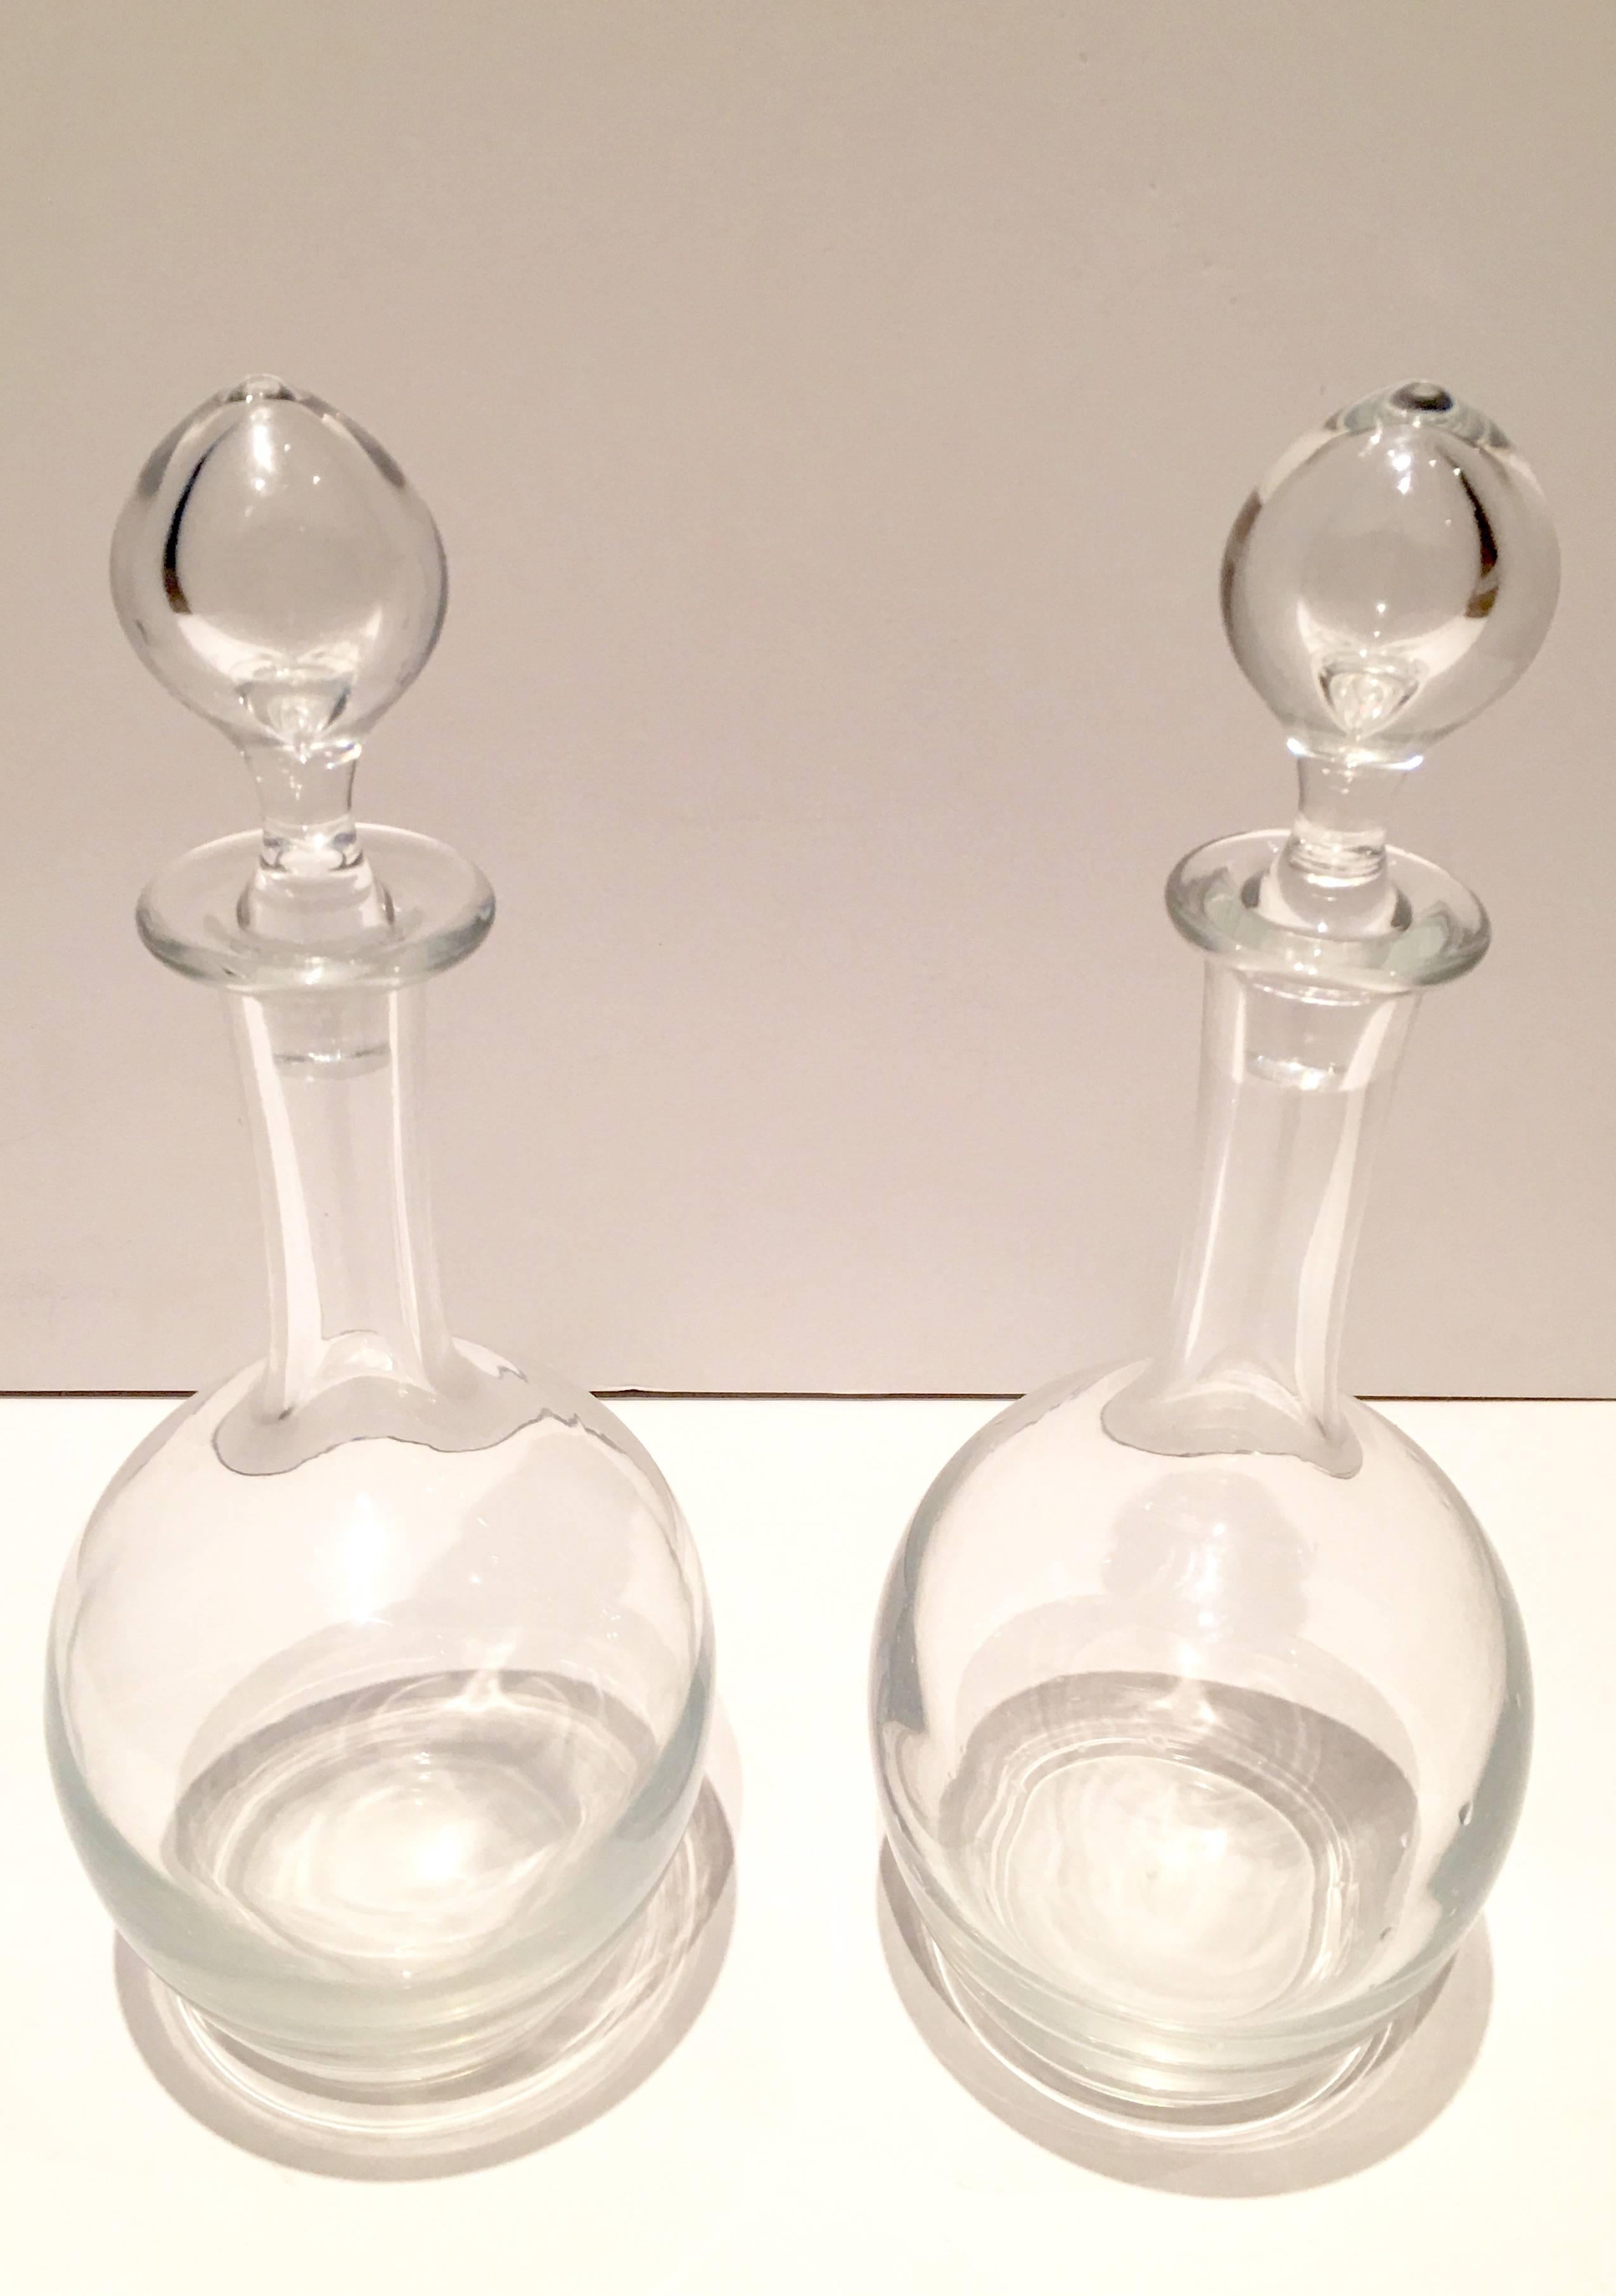 This pair of crystal clear decanters with stoppers are each marked on the underside, Baccarat, France.